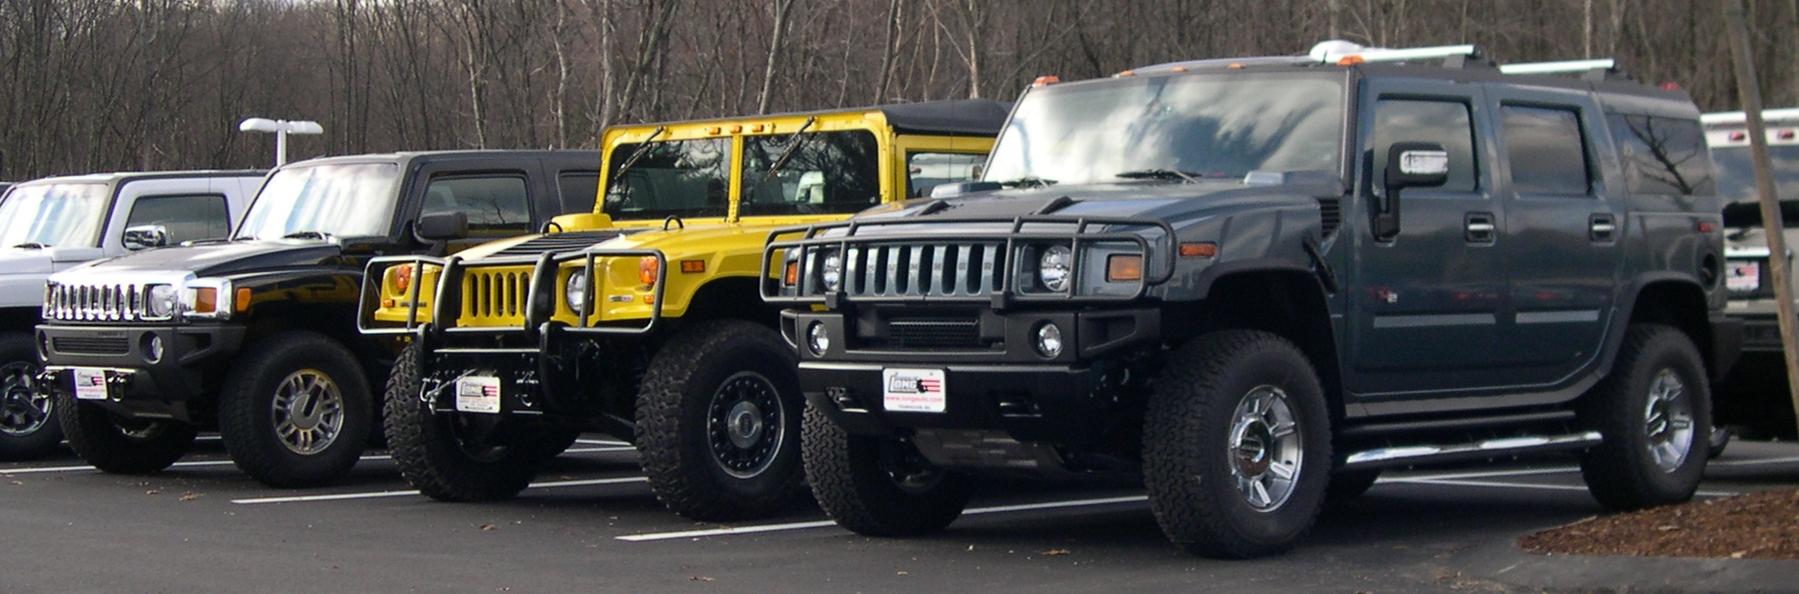 2006_Hummer_H3_H1_and_H2.jpg